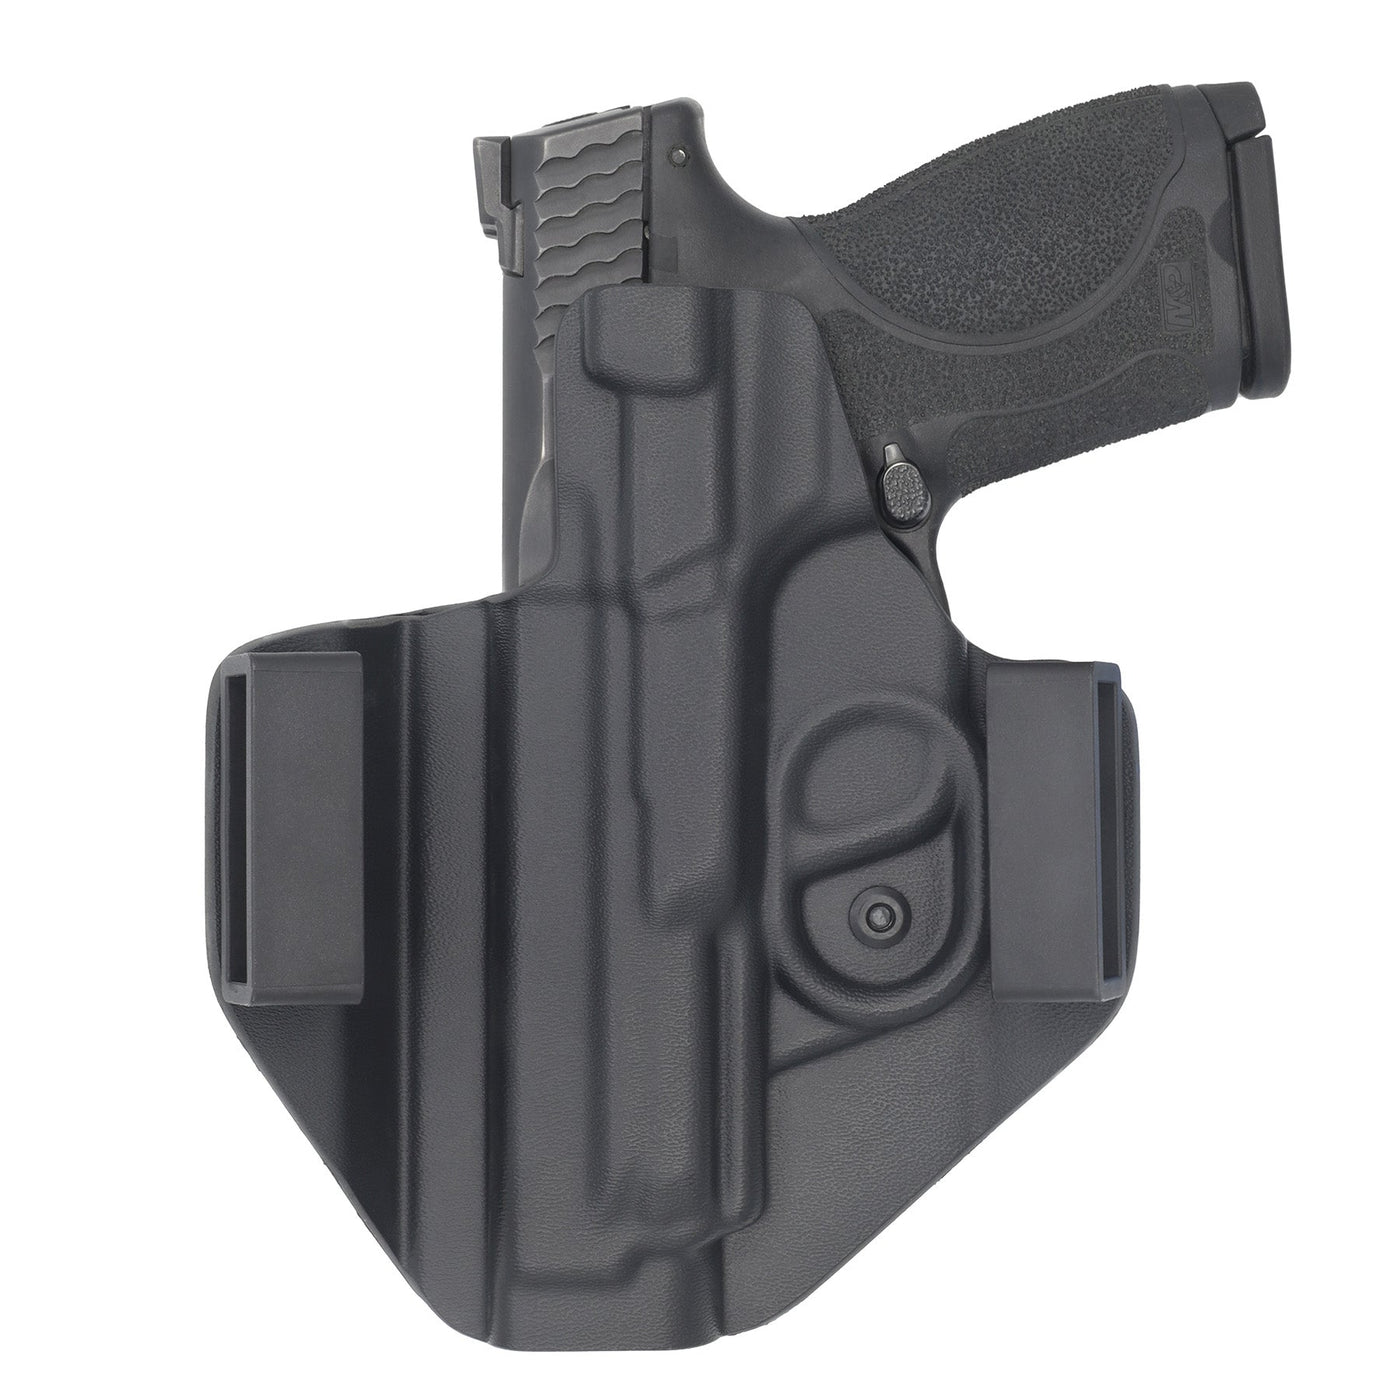 C&G Holsters quick ship Covert OWB kydex holster for Smith & Wesson M&P 2.0 9/40 in holstered position in rear view